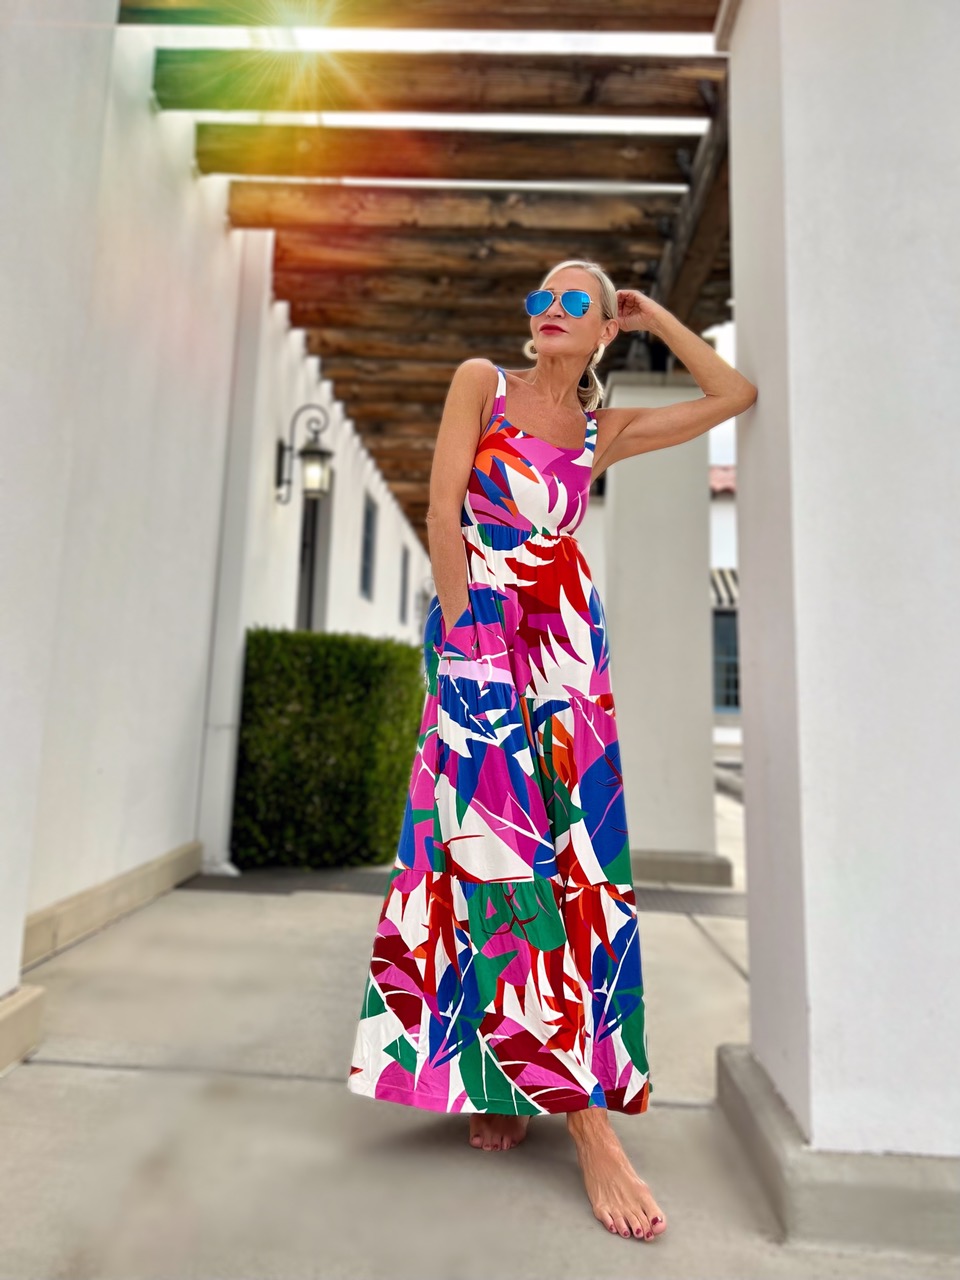 Lifestyle Influencer, Jamie Lewinger of More Than Turquoise wearing Soma bra dress